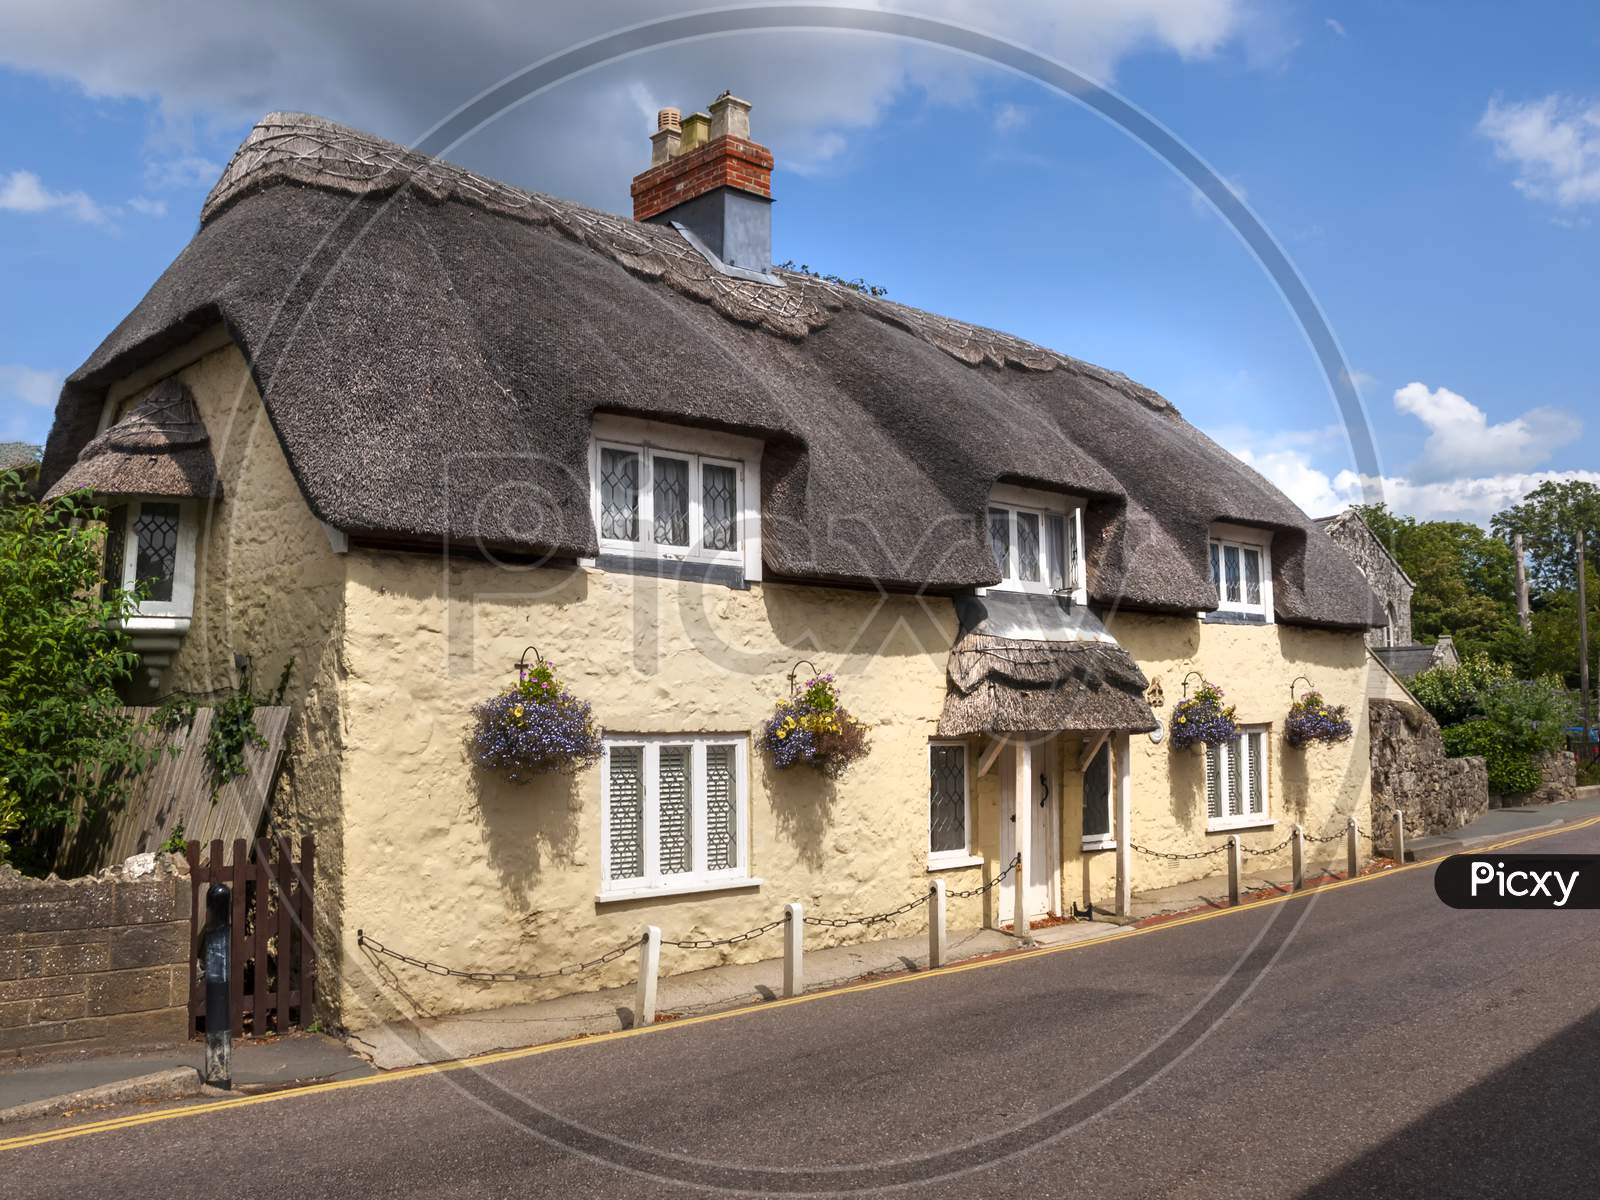 A typical thatched cottage Isle of Wight 21 July 2014